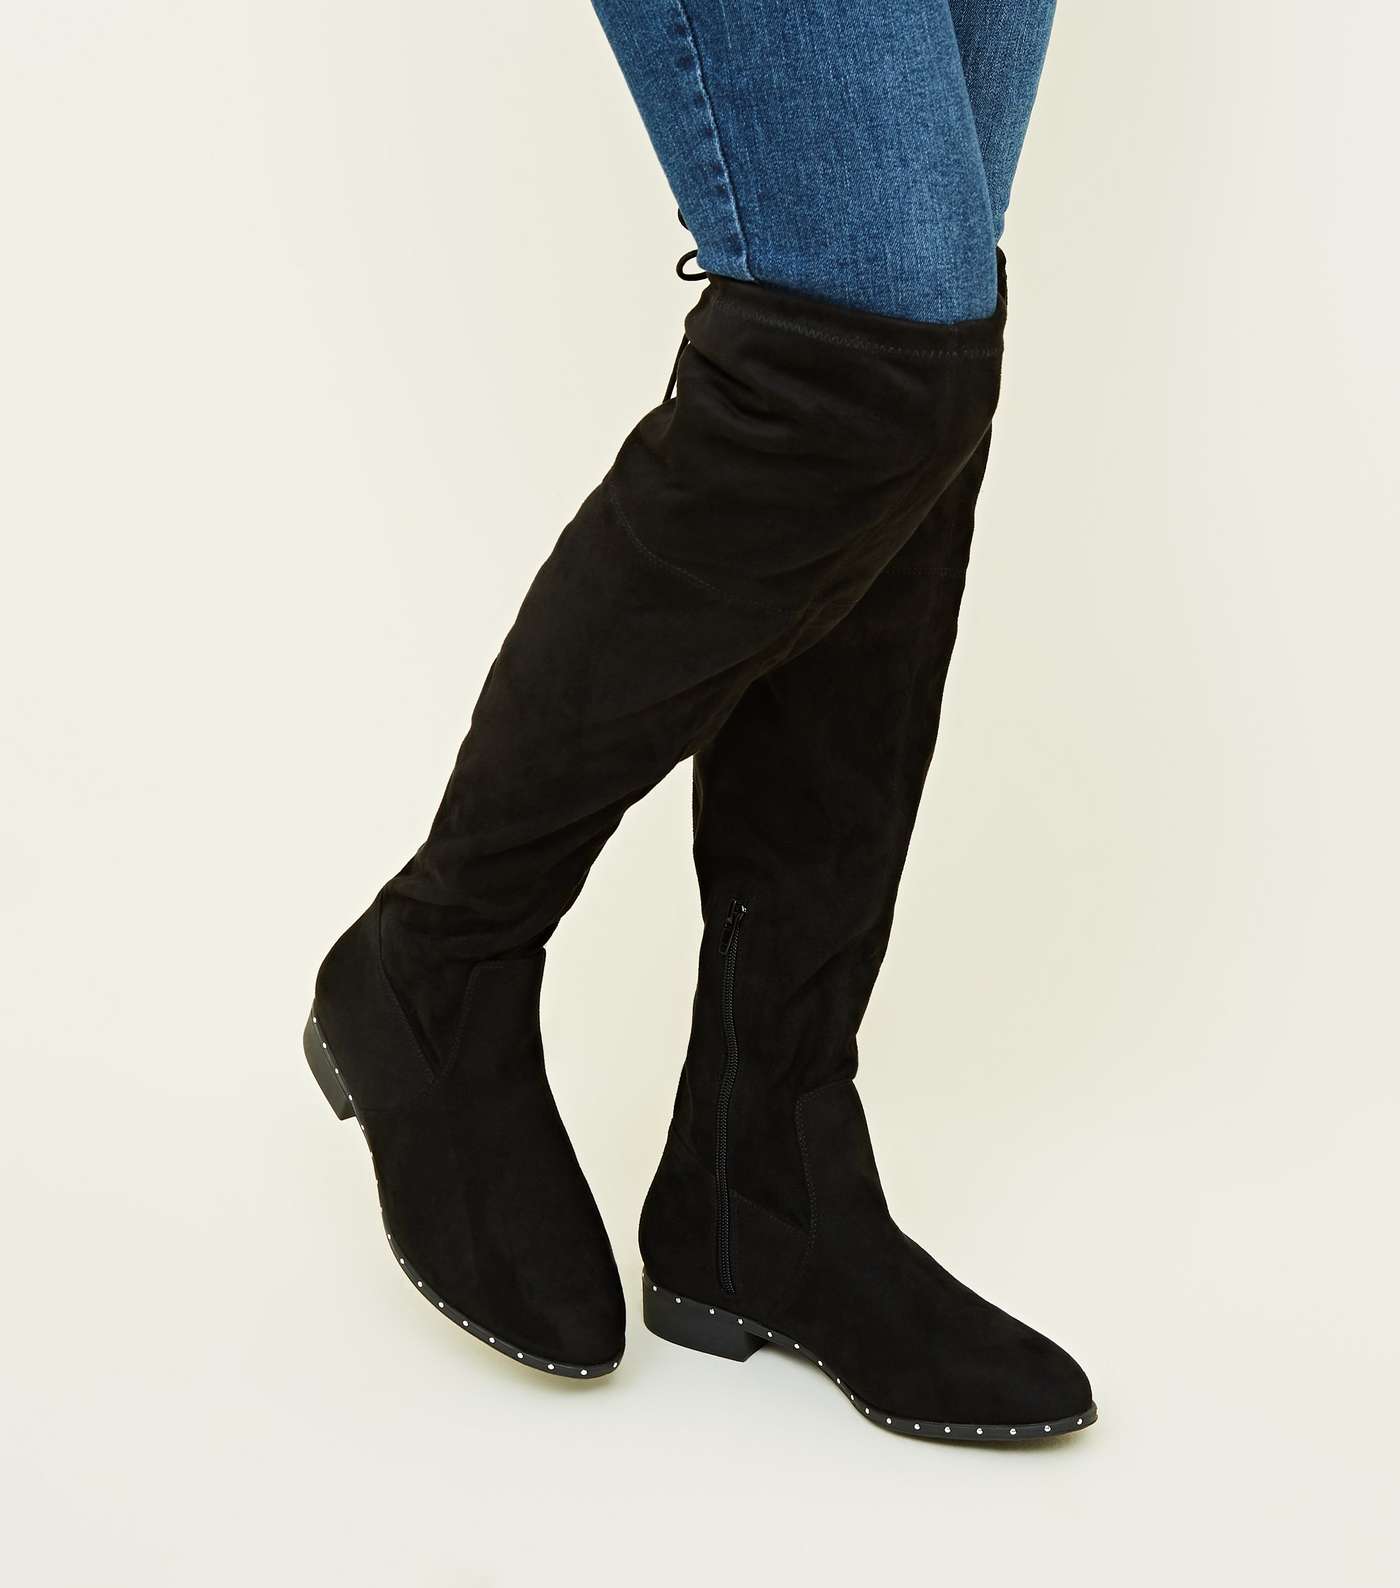 Wide Fit Black Stud Trim Over the Knee Boots Image 2